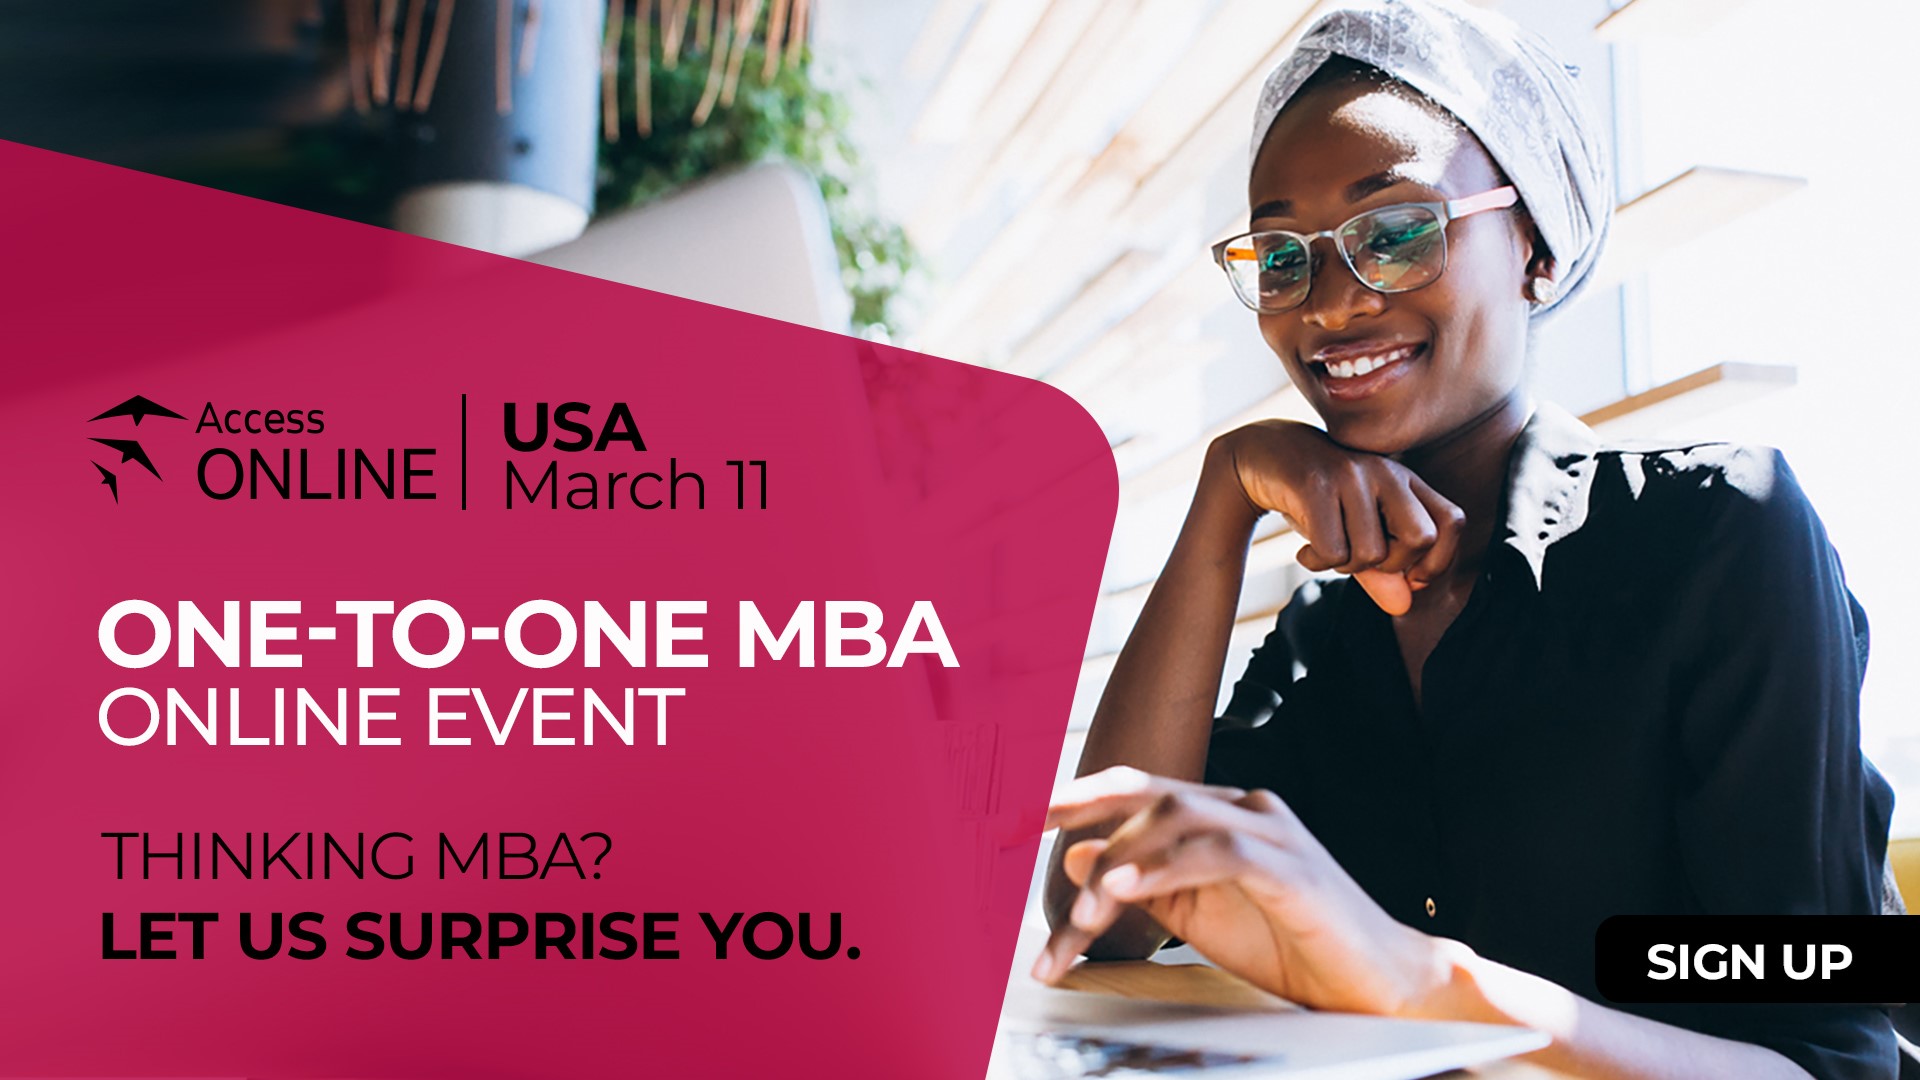 MBA ONLINE EVENT, Online Event